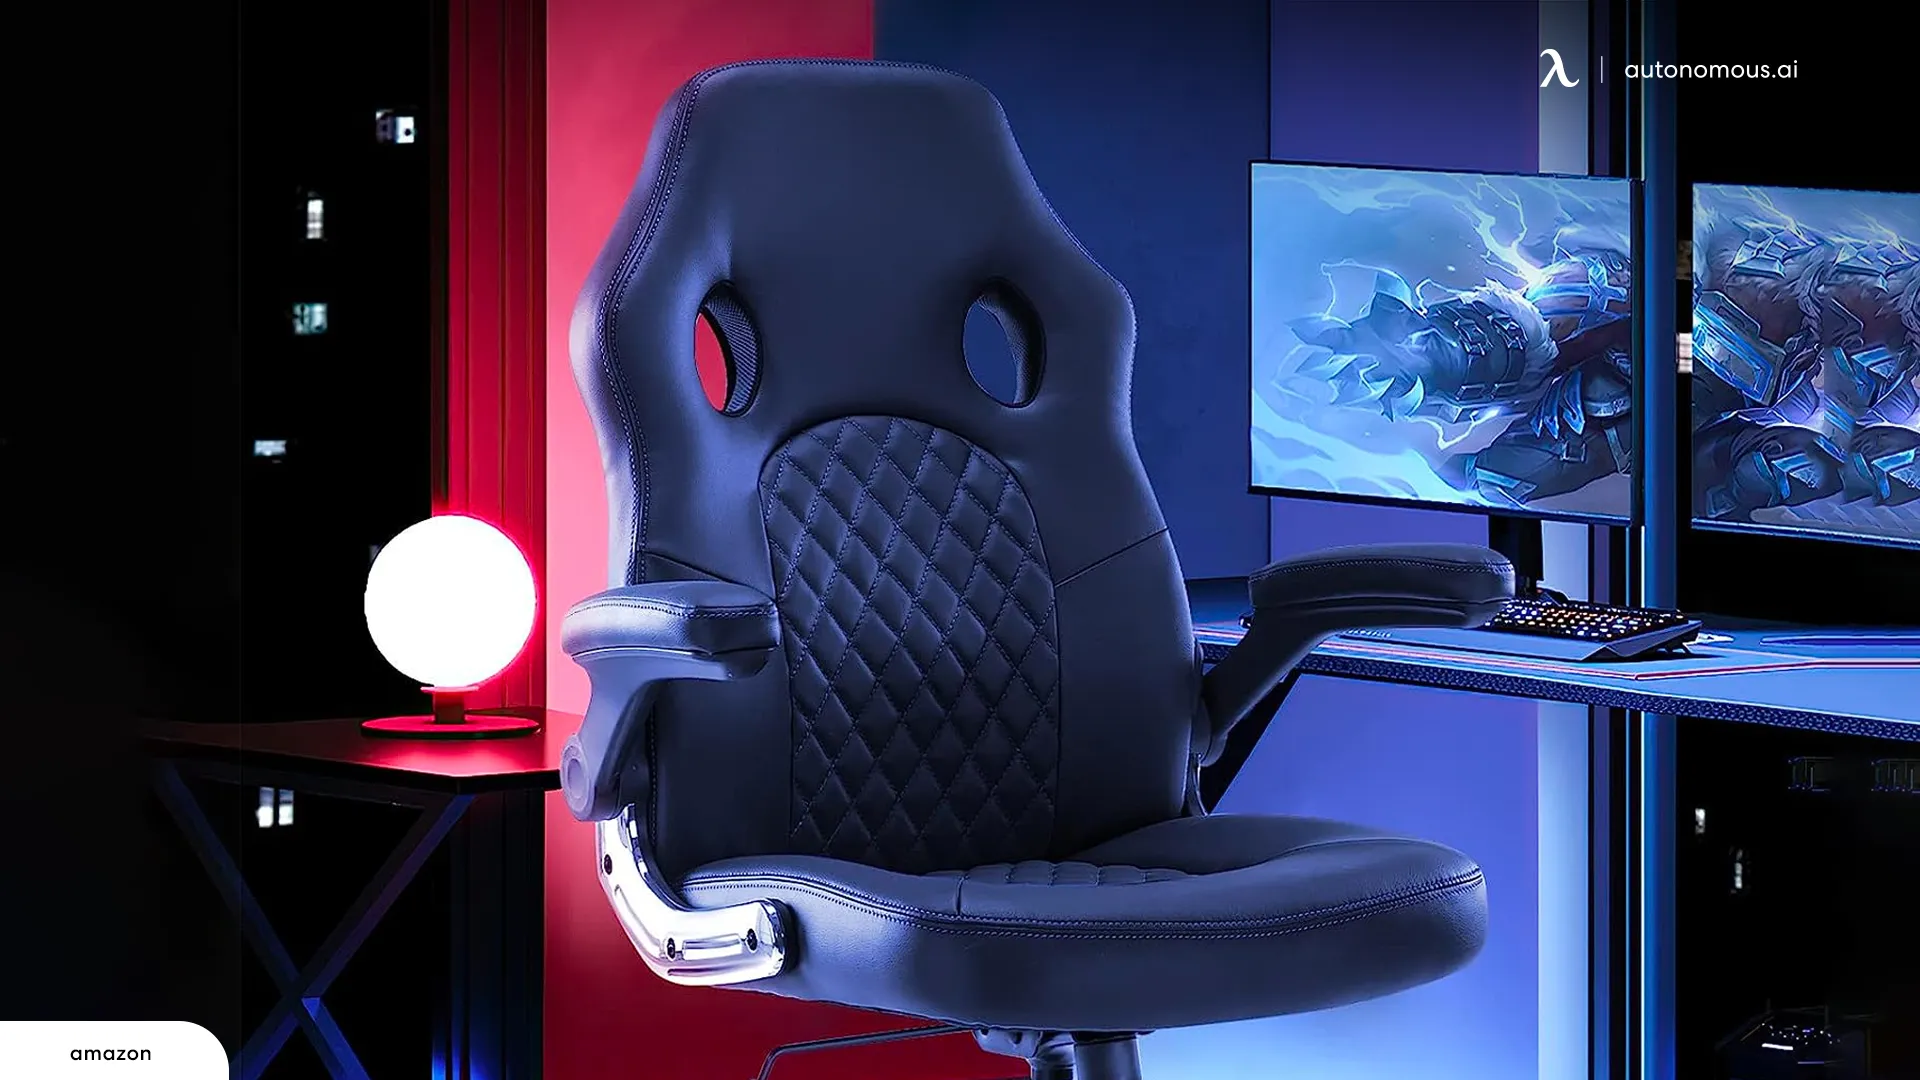 Budget Gaming Chairs: Finding the Best Options Under $100